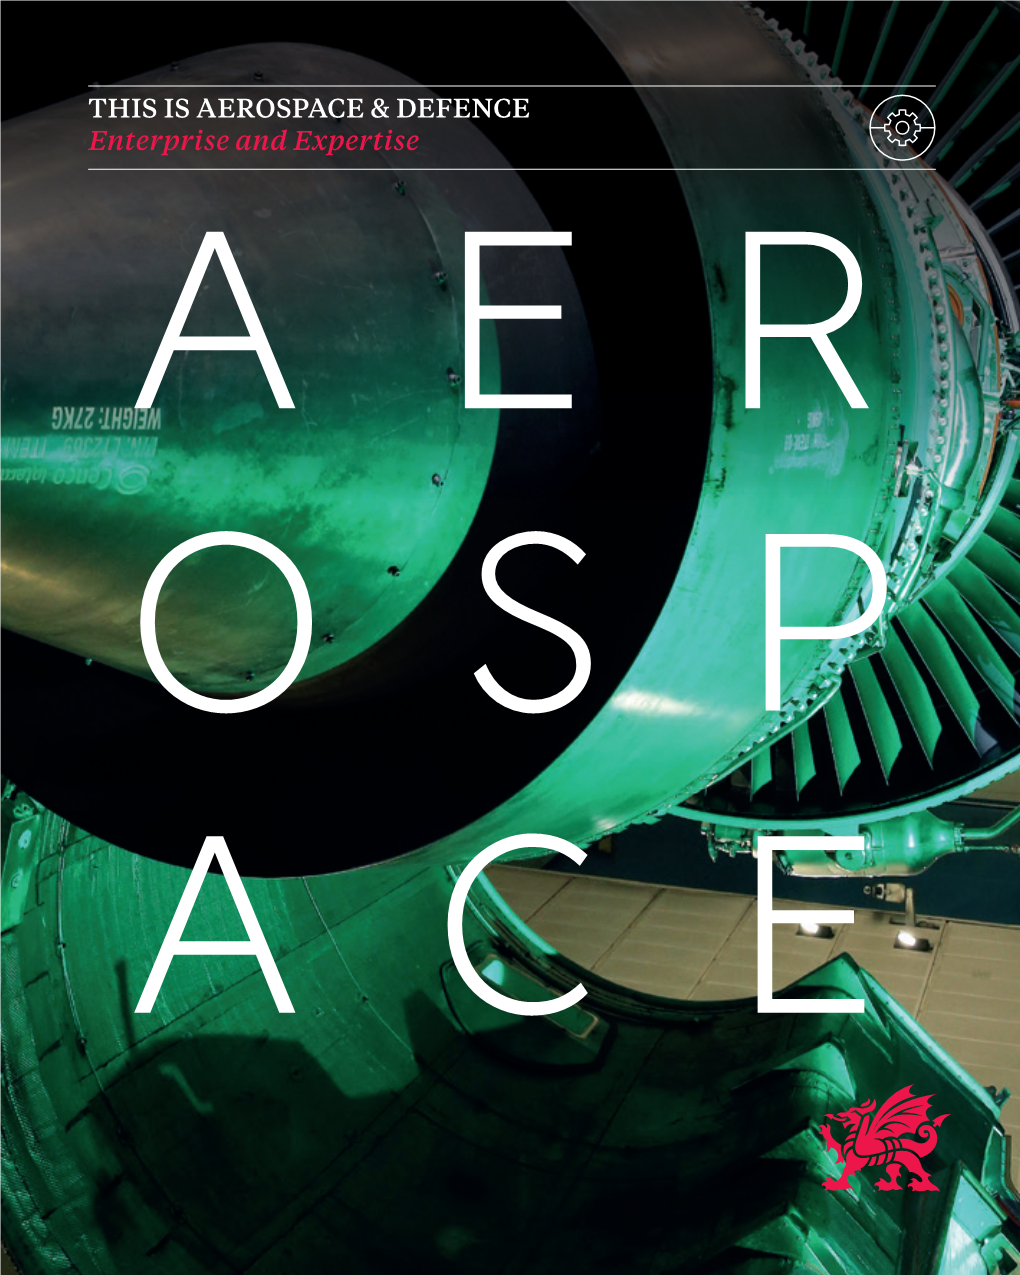 THIS IS AEROSPACE & DEFENCE Enterprise and Expertise